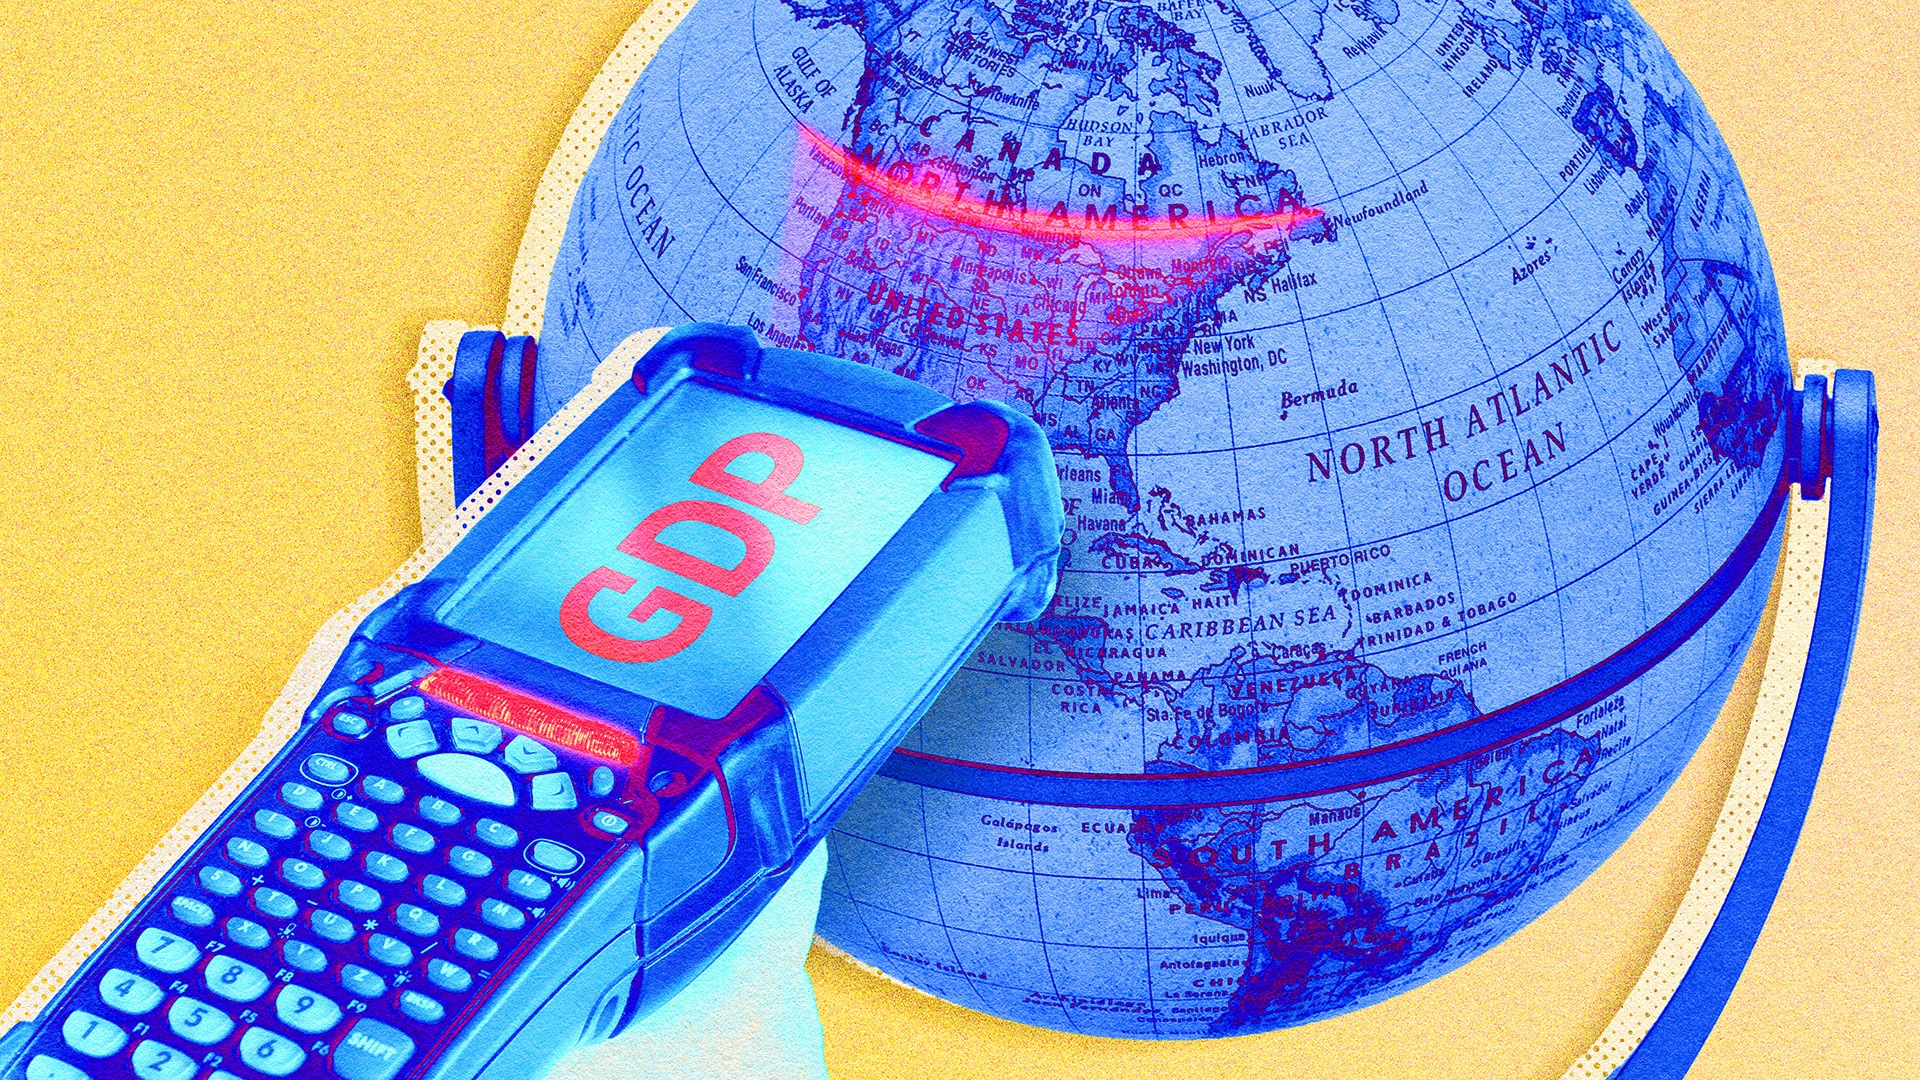 Illustration of a barcode scanner being used on a globe, with the letters "GDP" on the scanner's display screen.